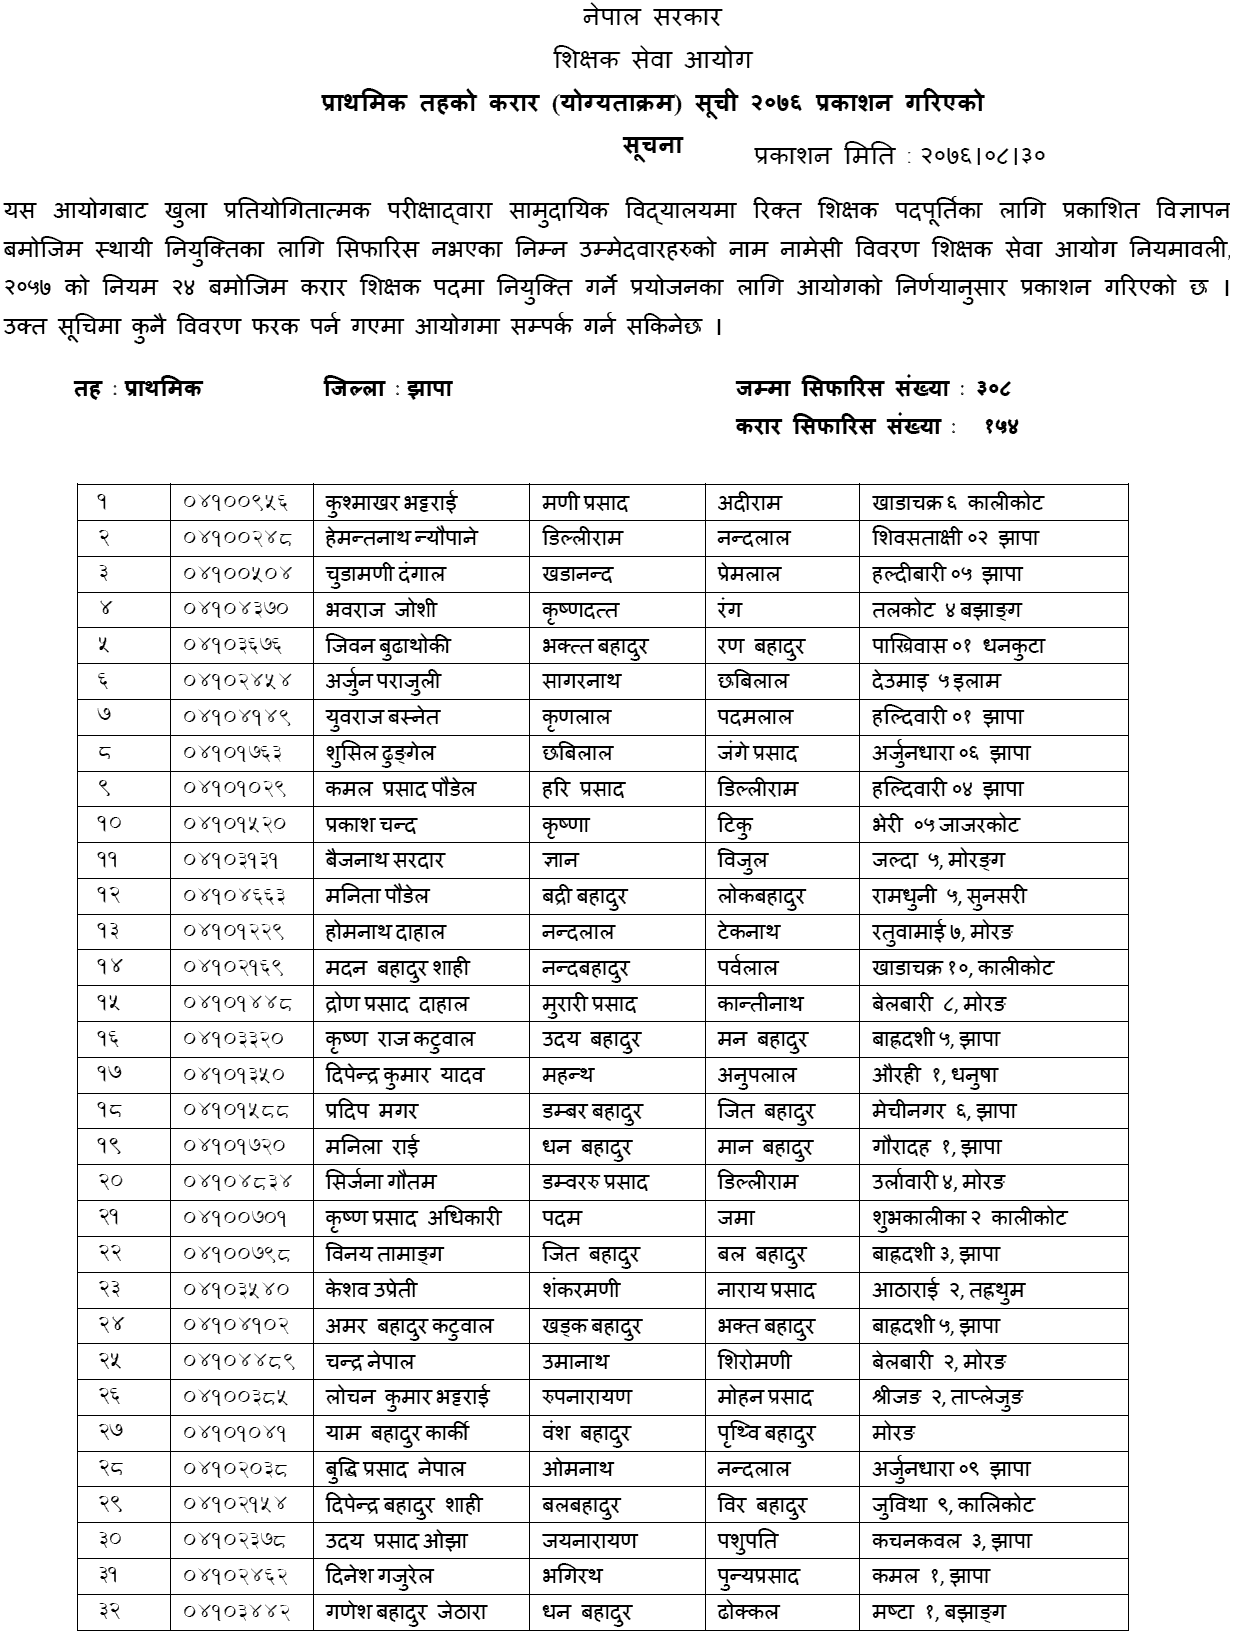 TSC Published Primary Level Contract List of Jhapa